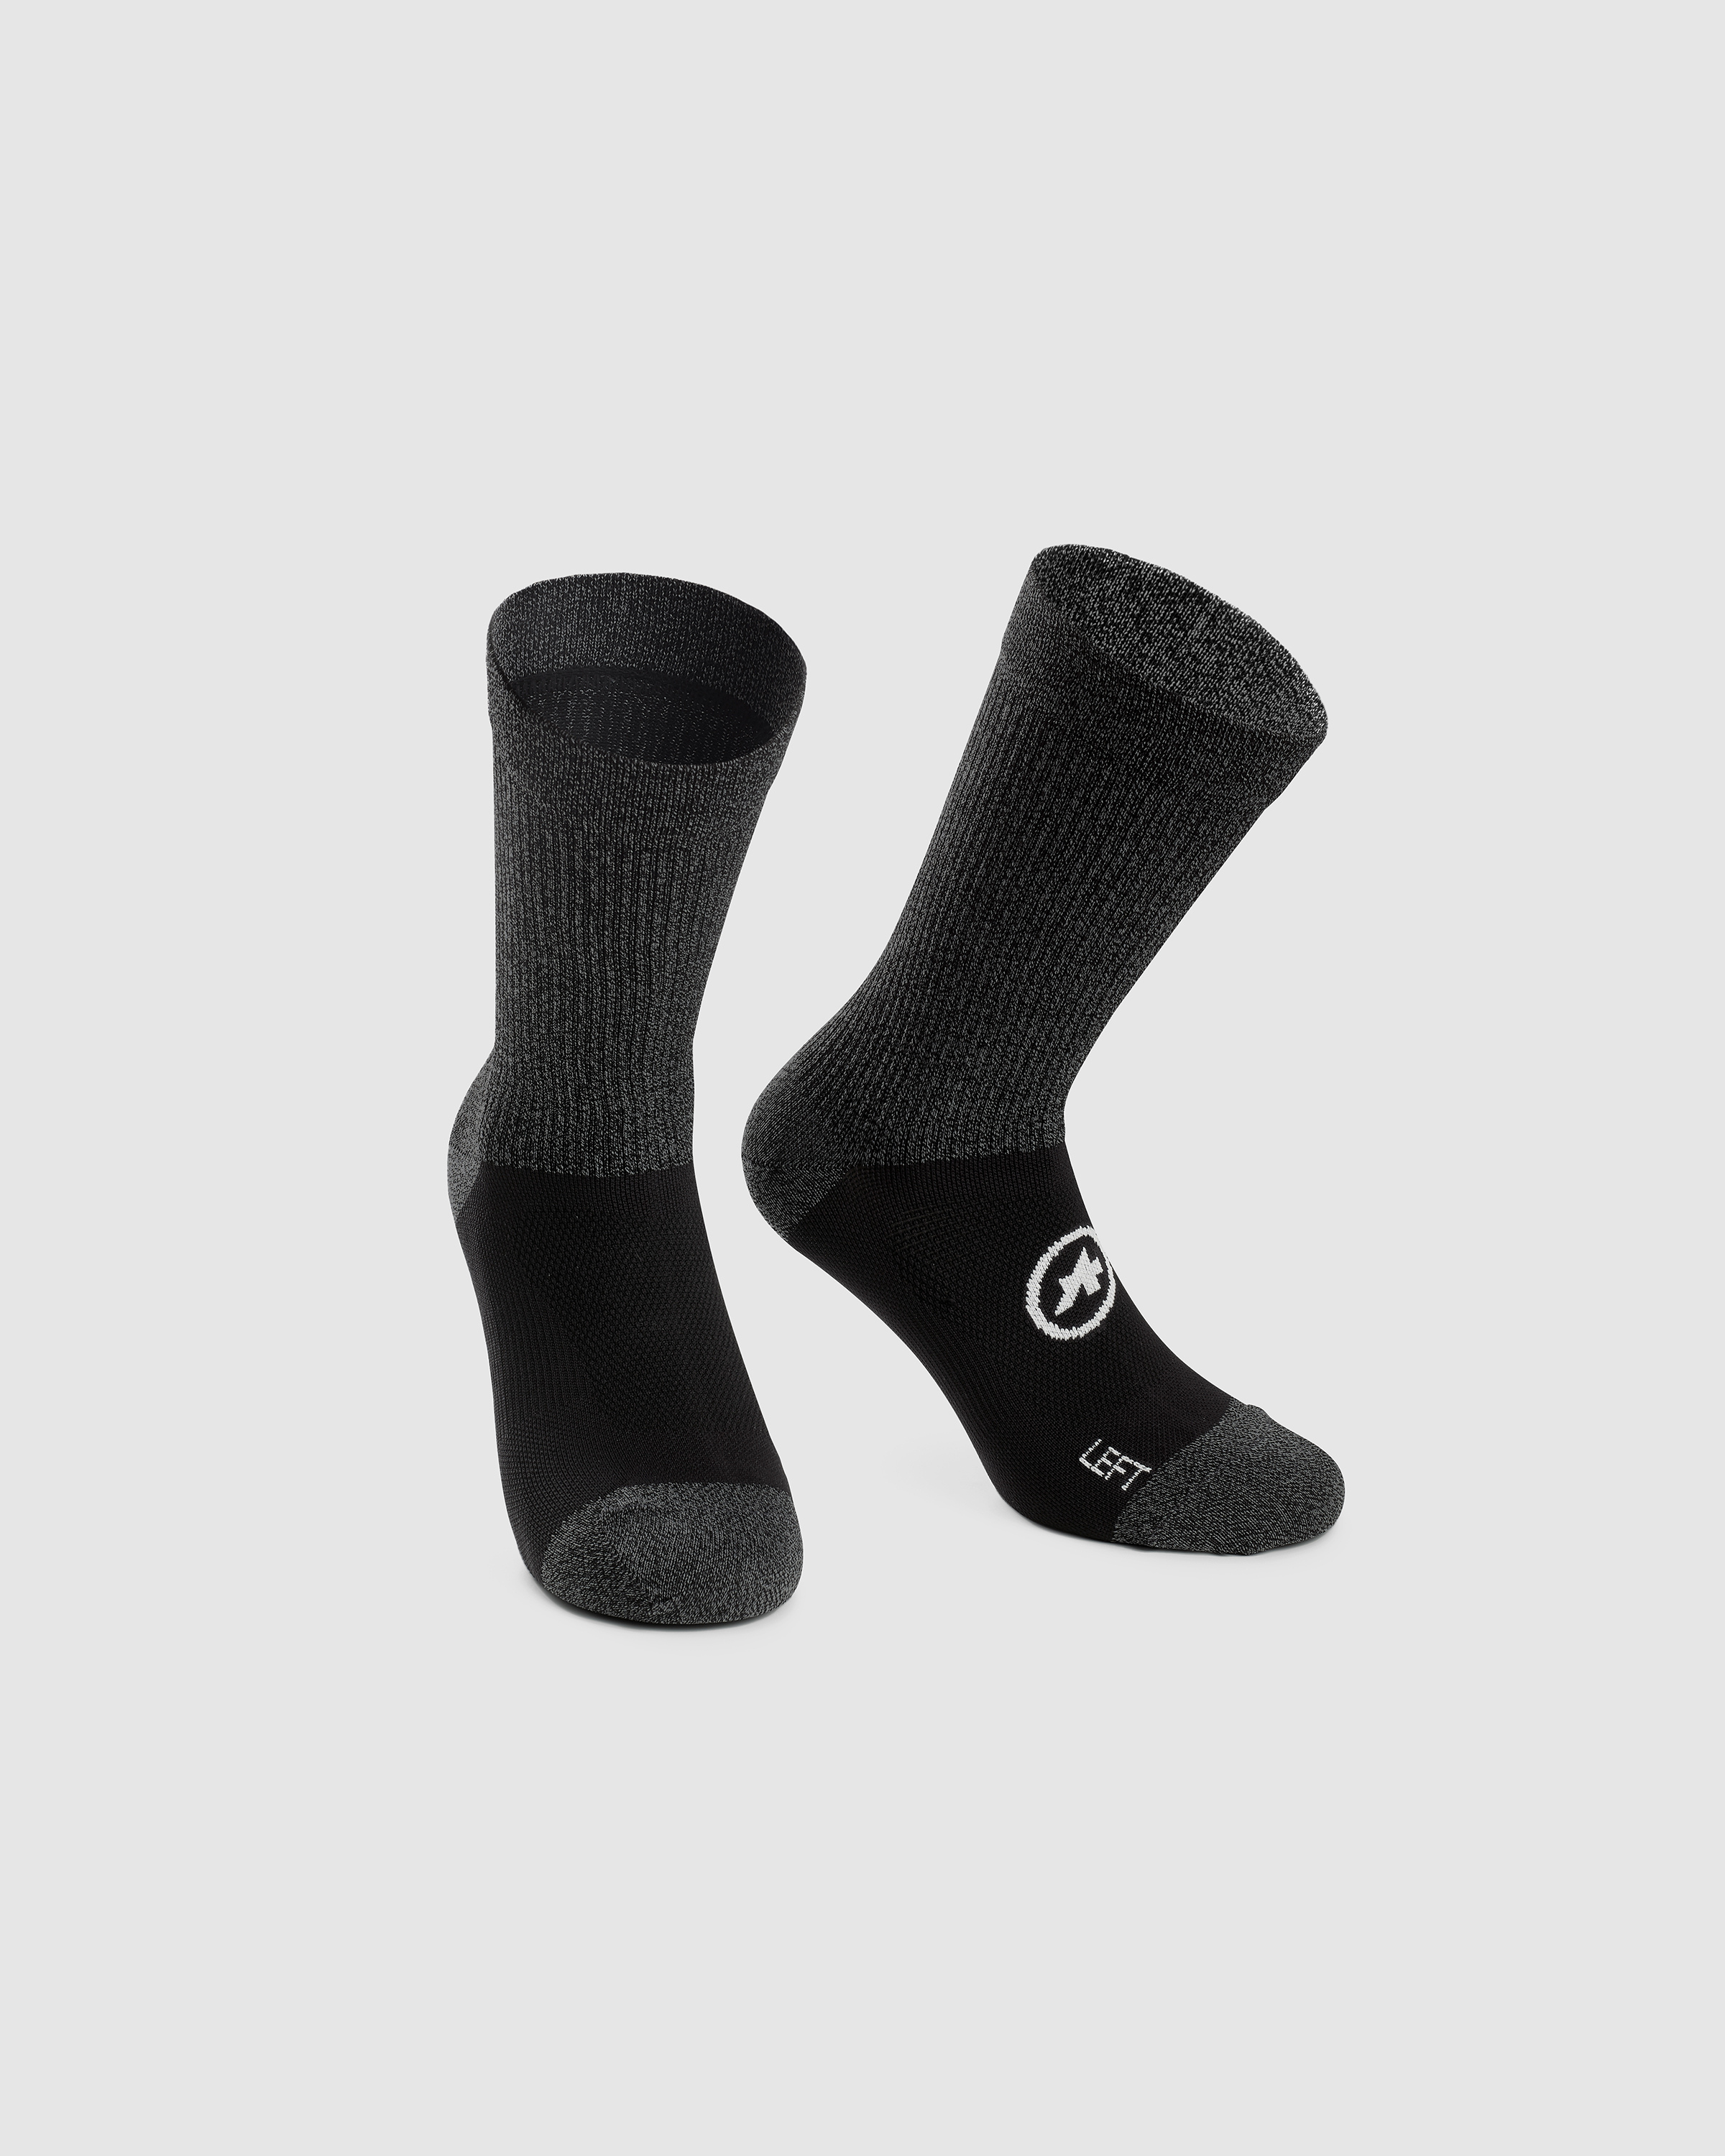 TRAIL Socks EVO - ASSOS Of Switzerland - Official Outlet